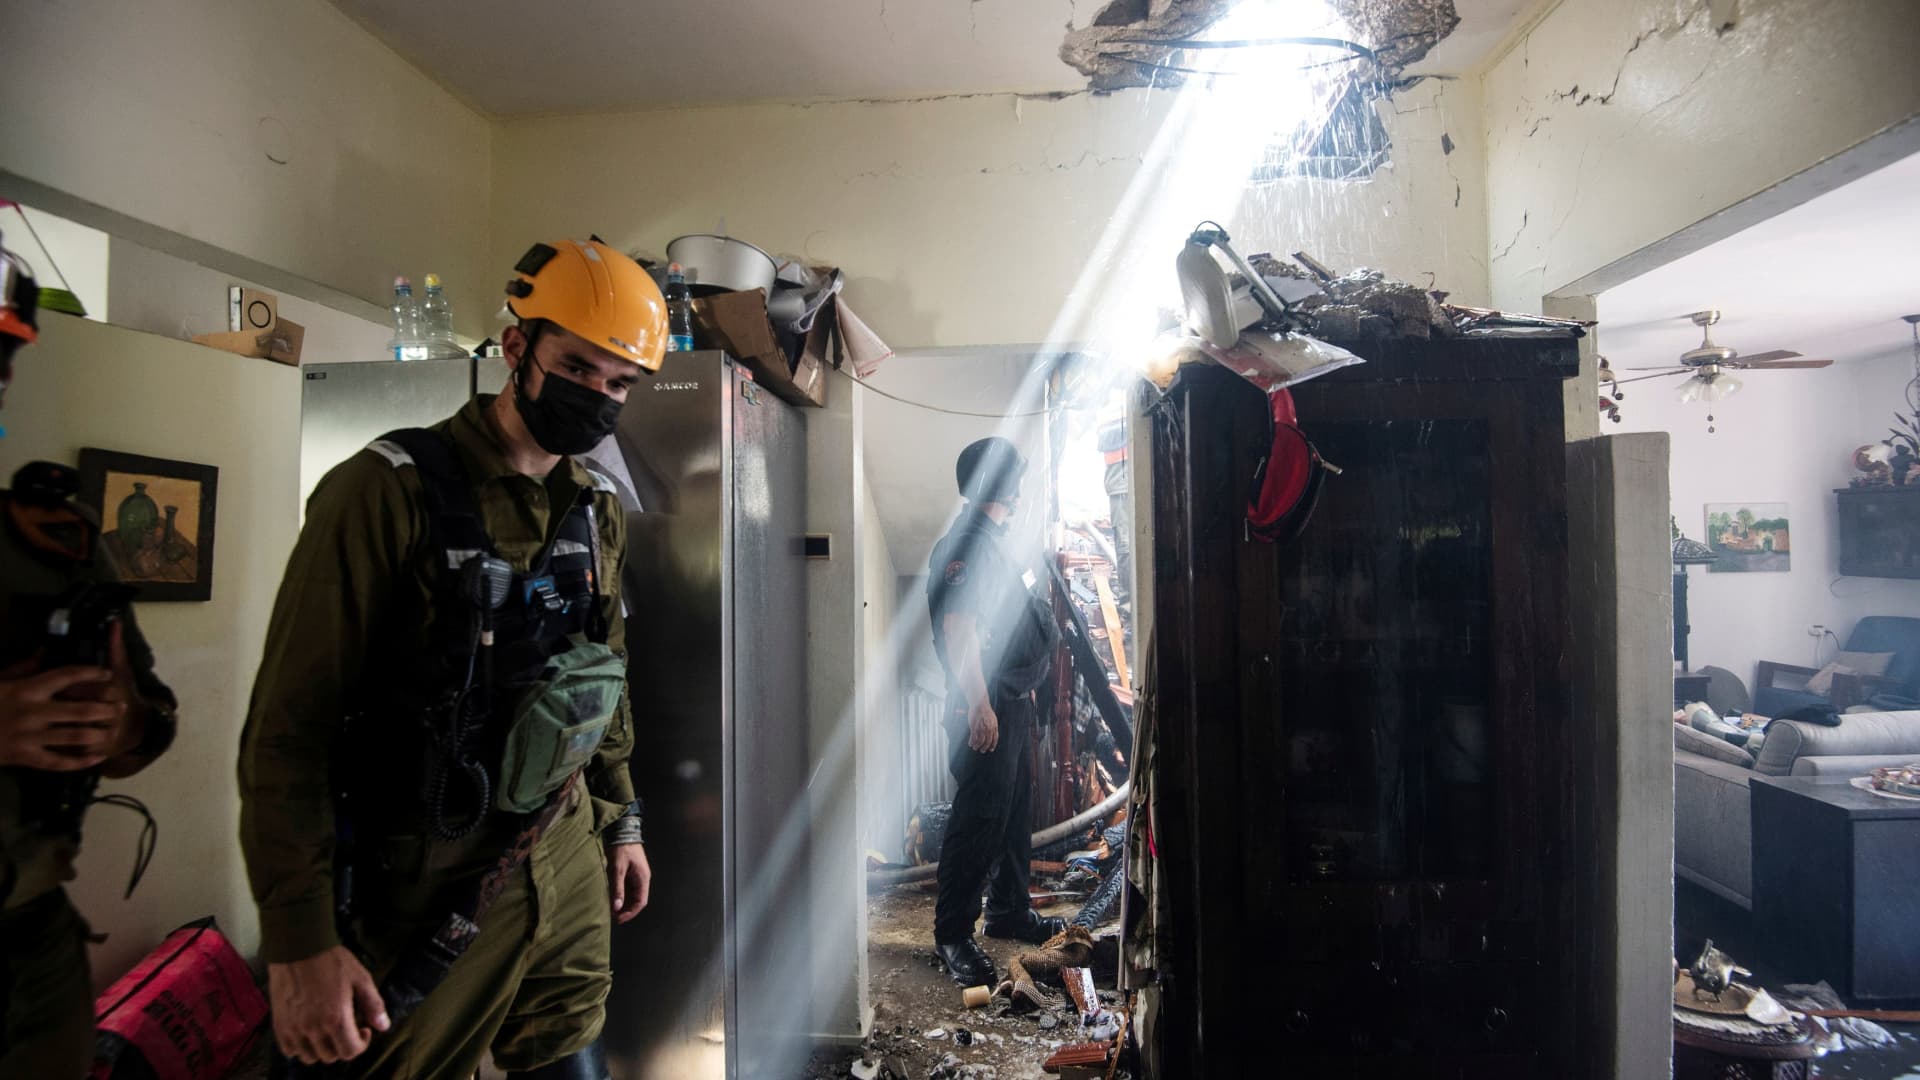 Soldiers work at a building damaged by a rocket launched from the Gaza Strip, in Ashdod, southern Israel, May 11, 2021.